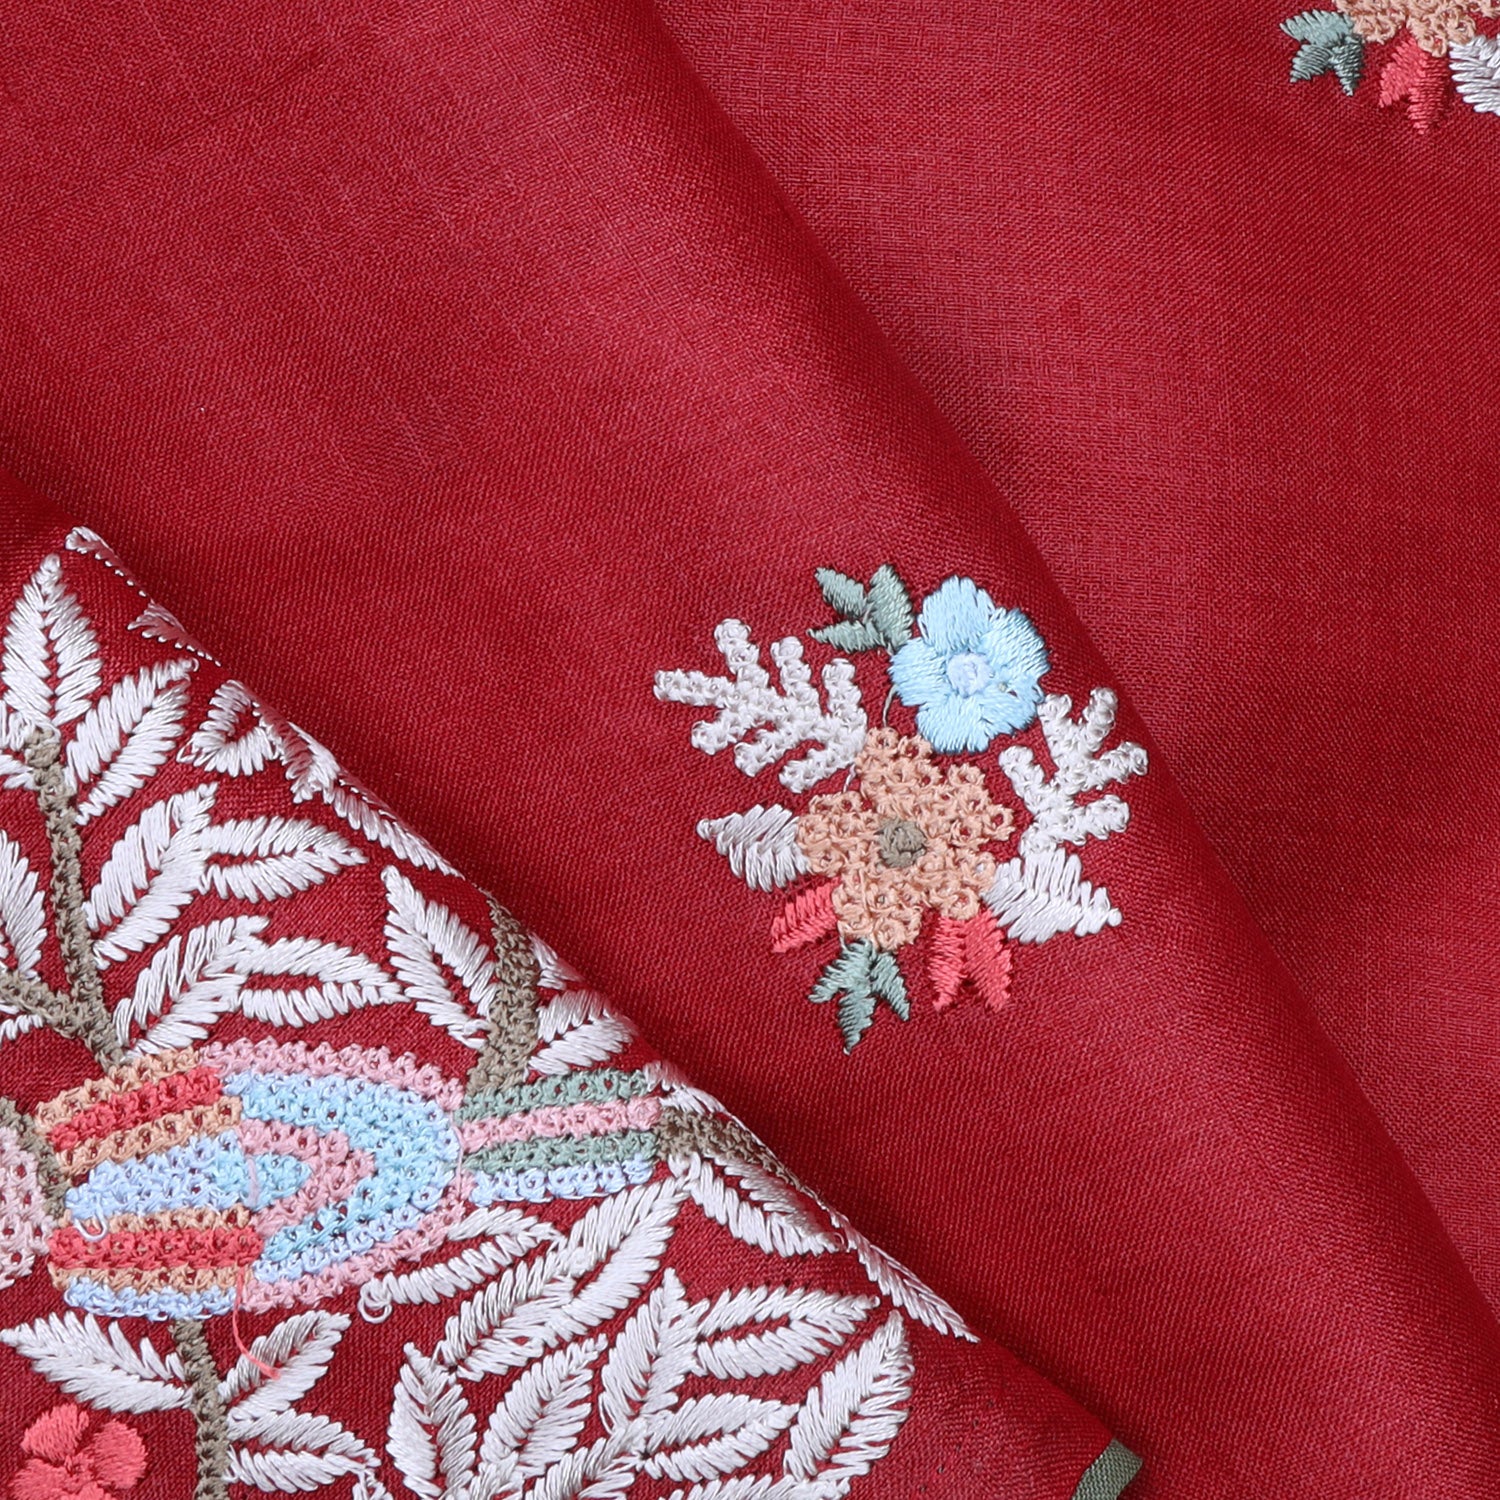 Ruby Red Tussar Floral Embroidered Saree - Singhania's